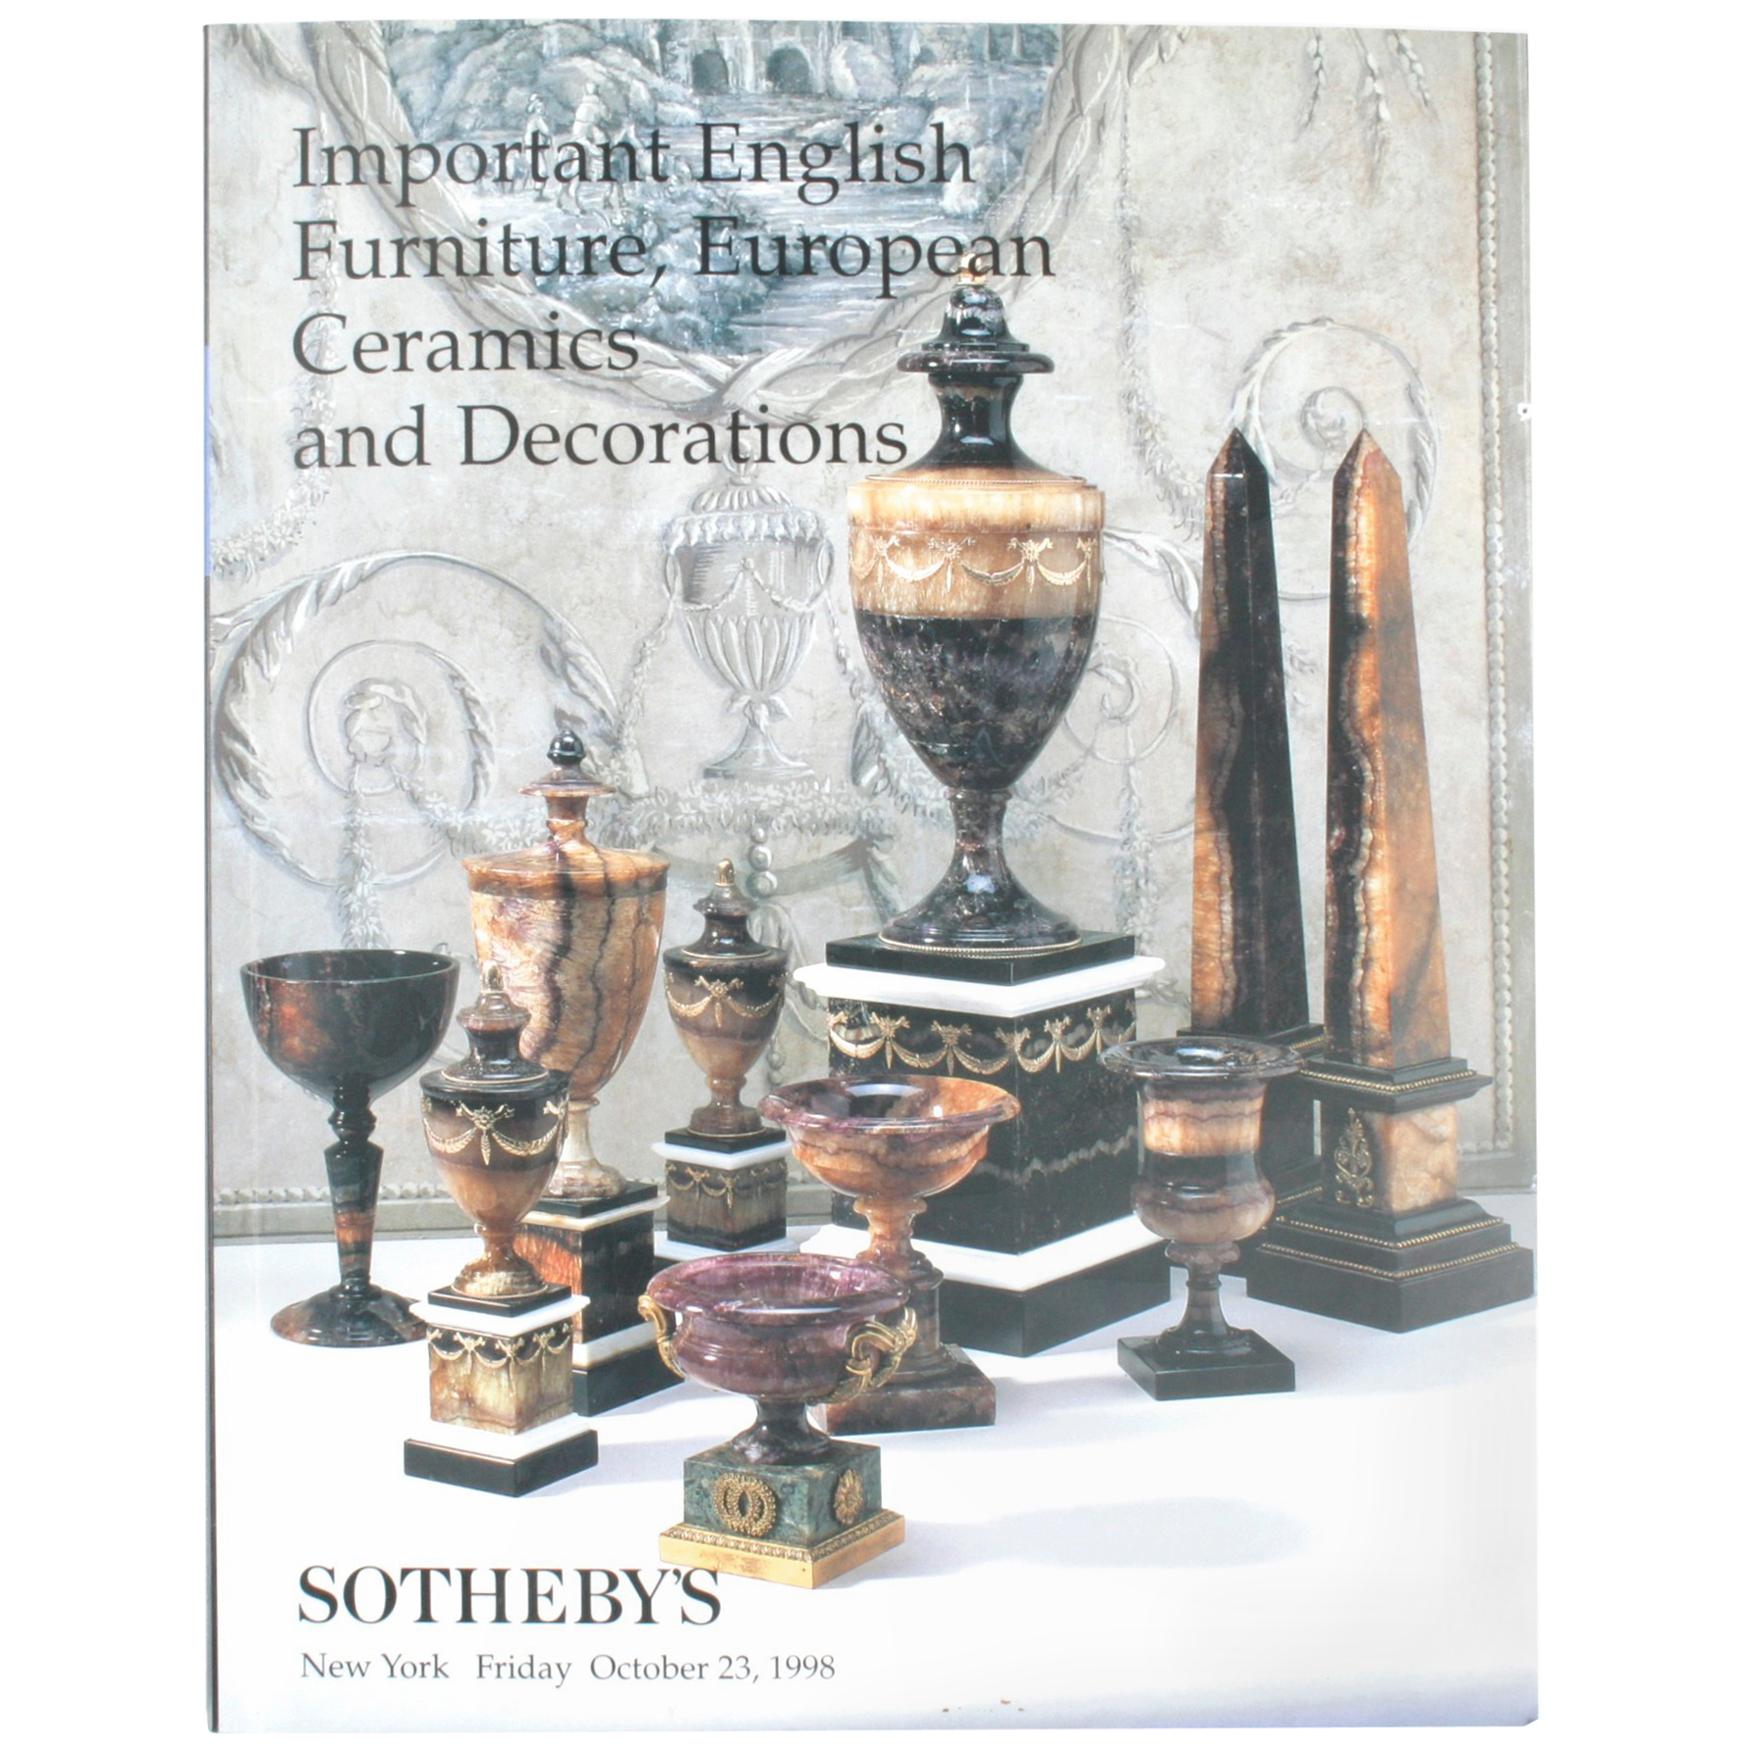 Sotheby's; Important English Furniture, European Ceramics and Decorations